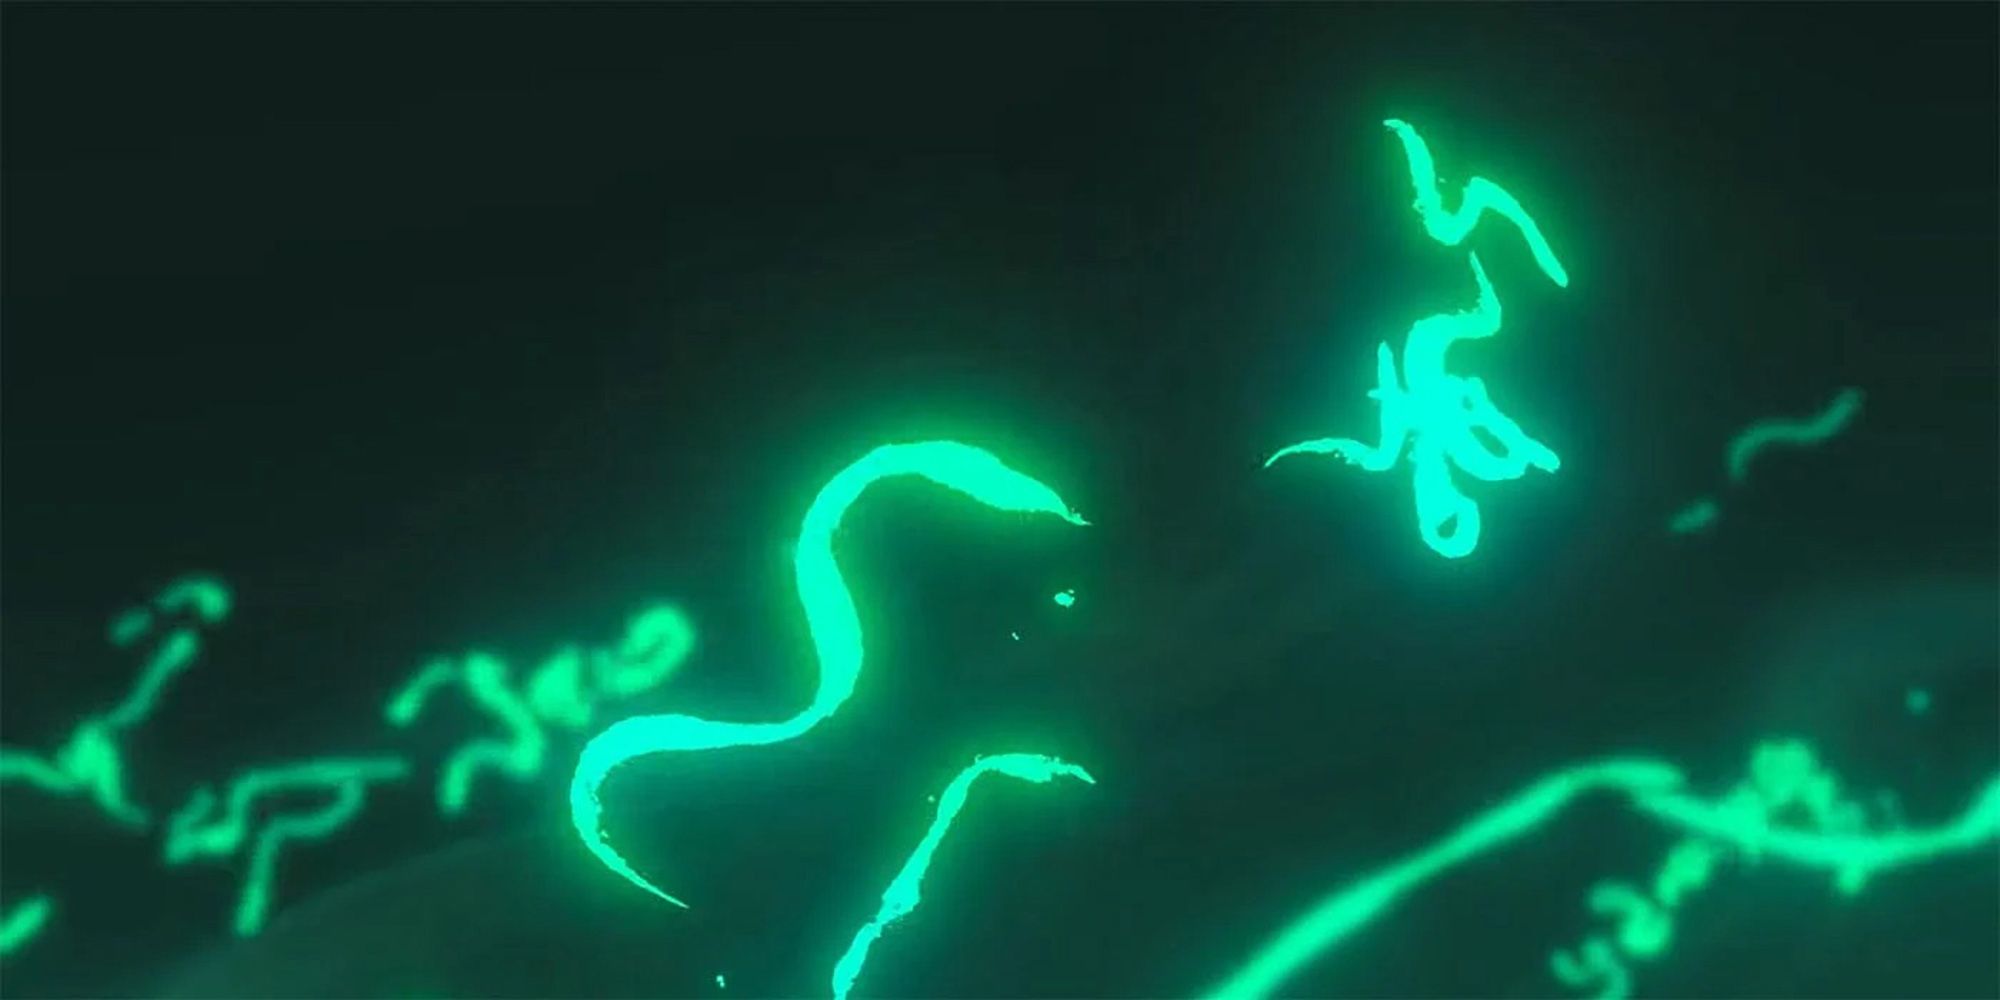 The Legend Of Zelda Breath Of The Wild 2 2019 Reveal Trailer - The Particles Of The Magic In The Air